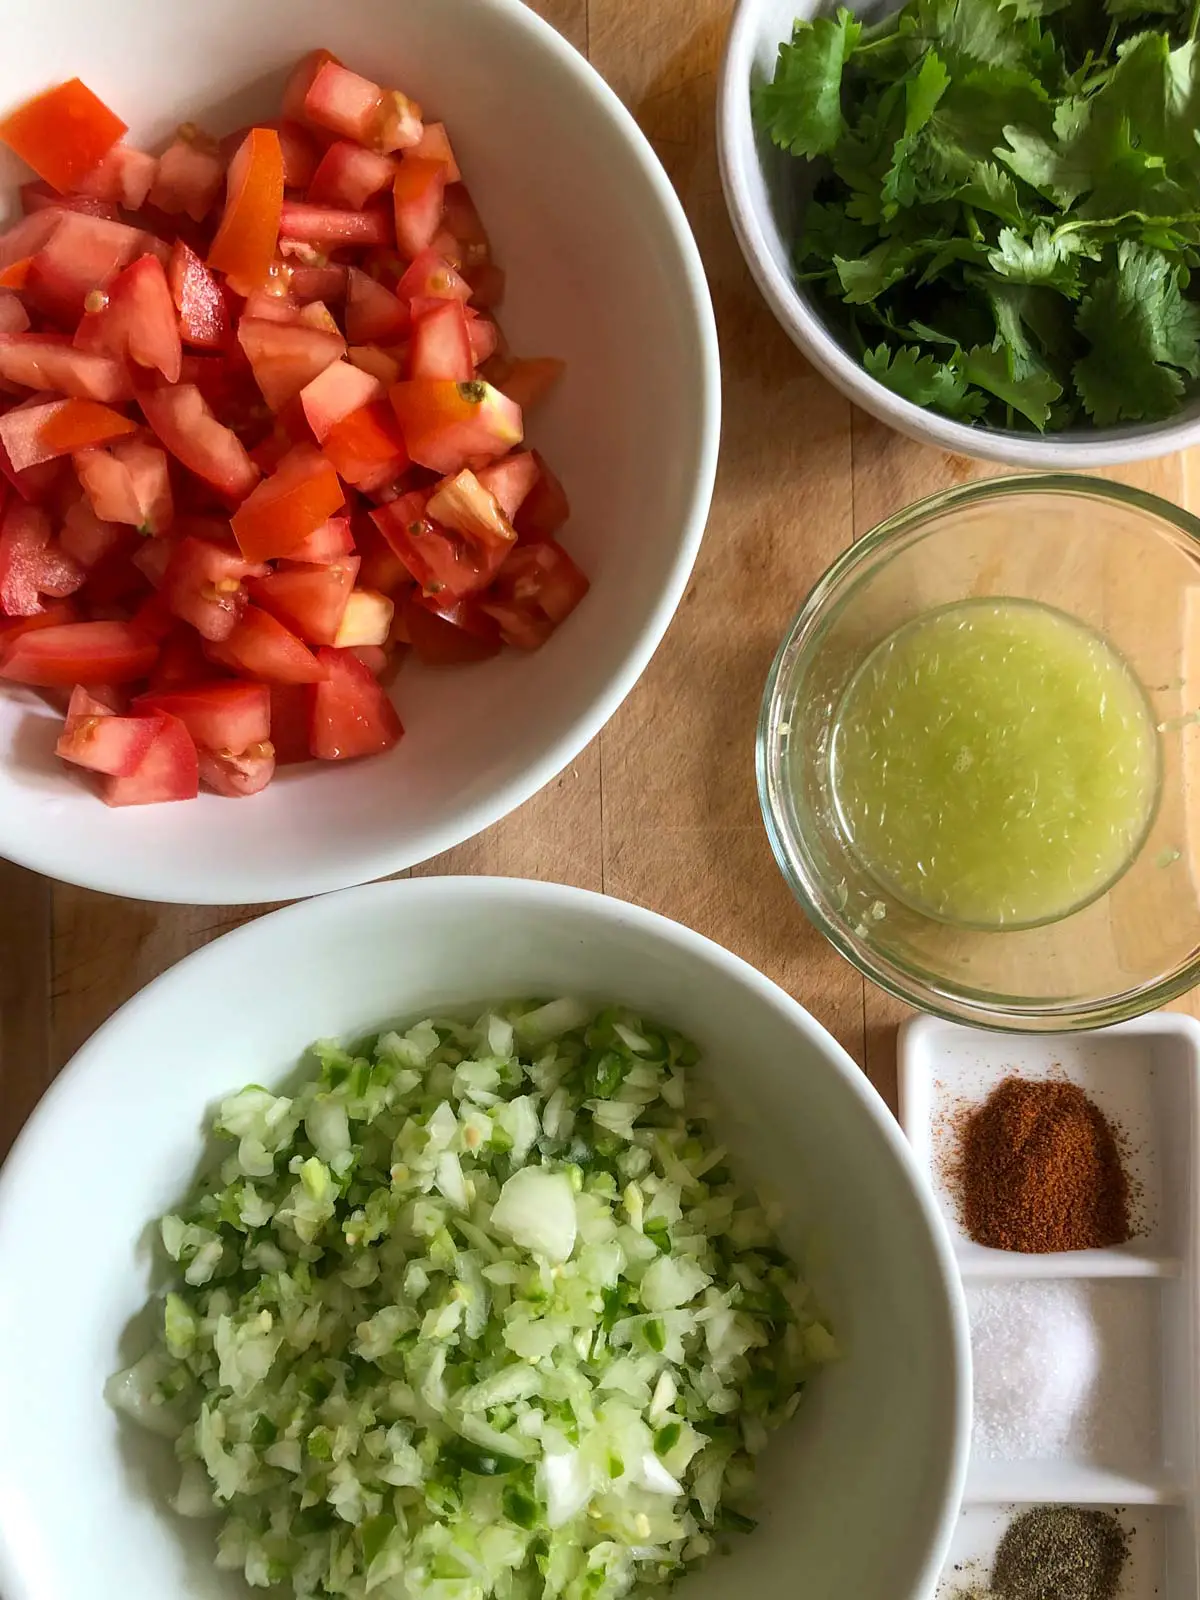 Diced tomatoes in a white bowl, cilantro in a white bowl, lime juice in a glass bowl, minced garlic, chilies, and onion in a white bowl, cayenne, salt, and pepper in a white dish.